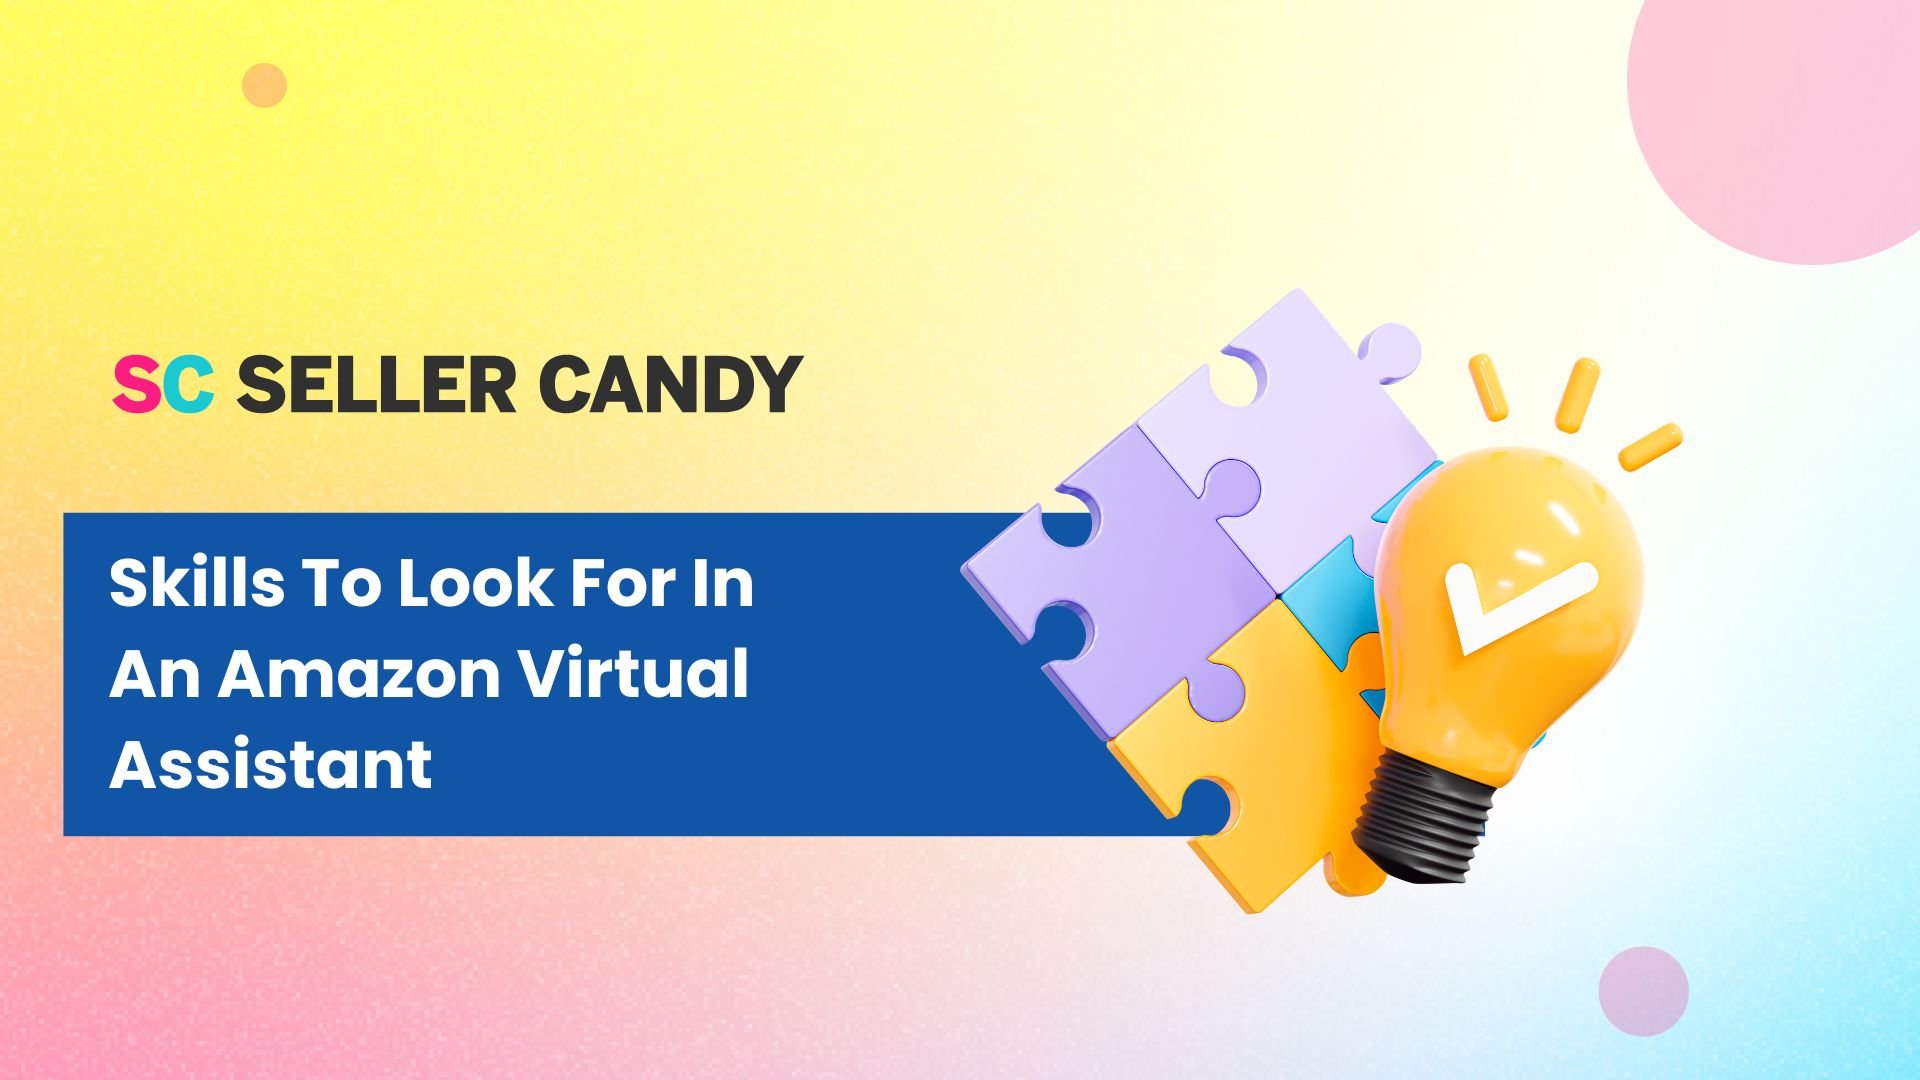 Skills To Look For In An Amazon Virtual Assistant